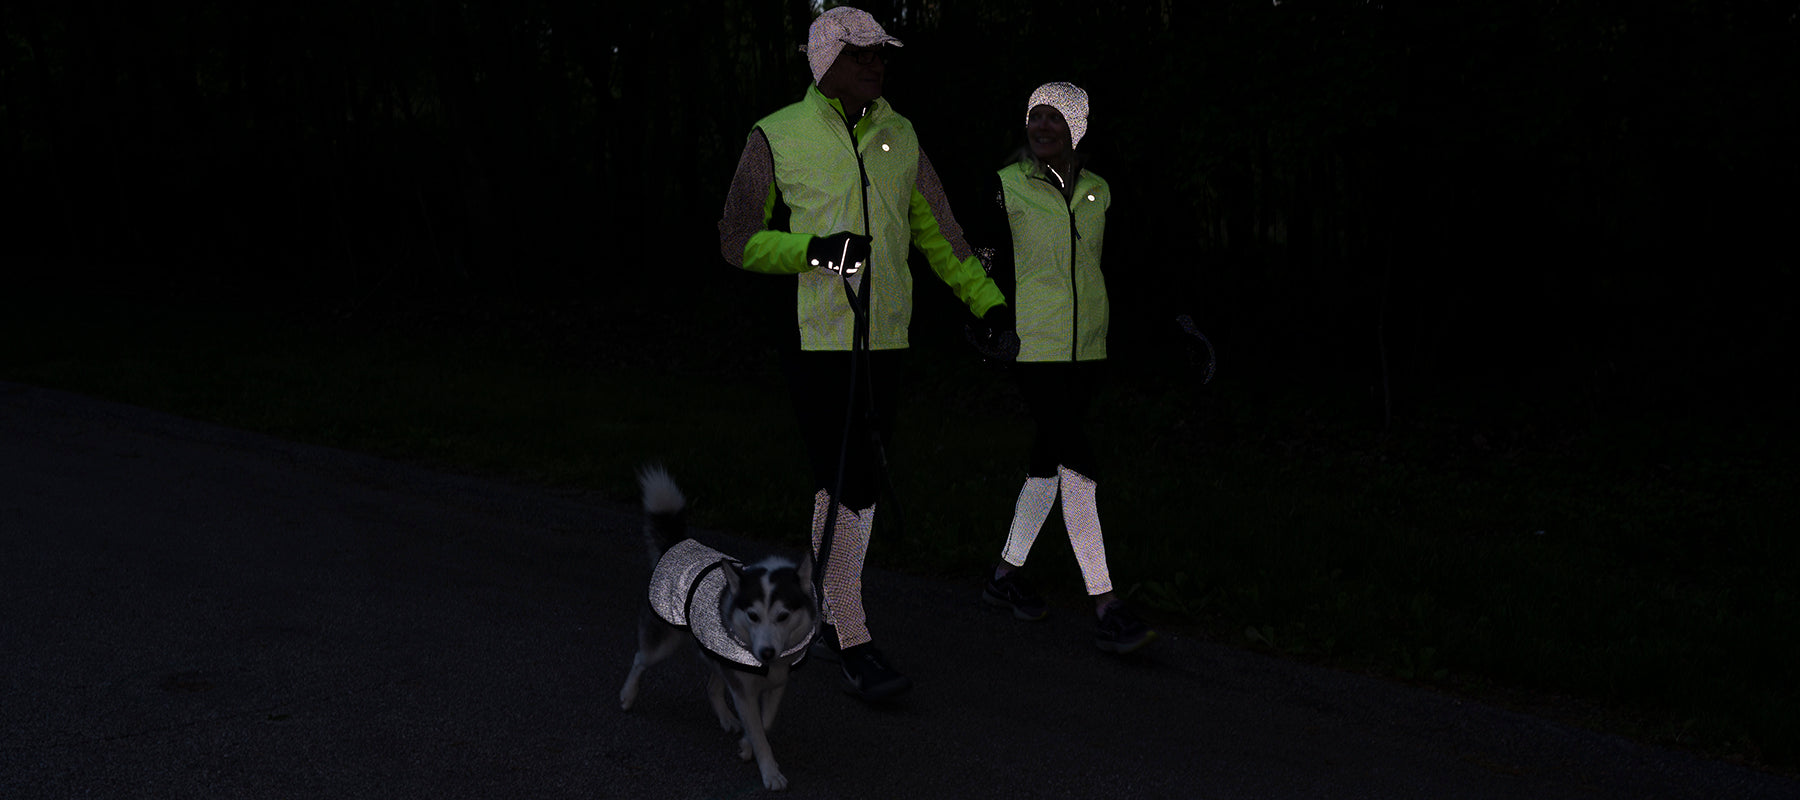 A man and a woman walking a dog at night. They are wearing reflective vests, leggings, and hats. The dog has a reflective jacket.